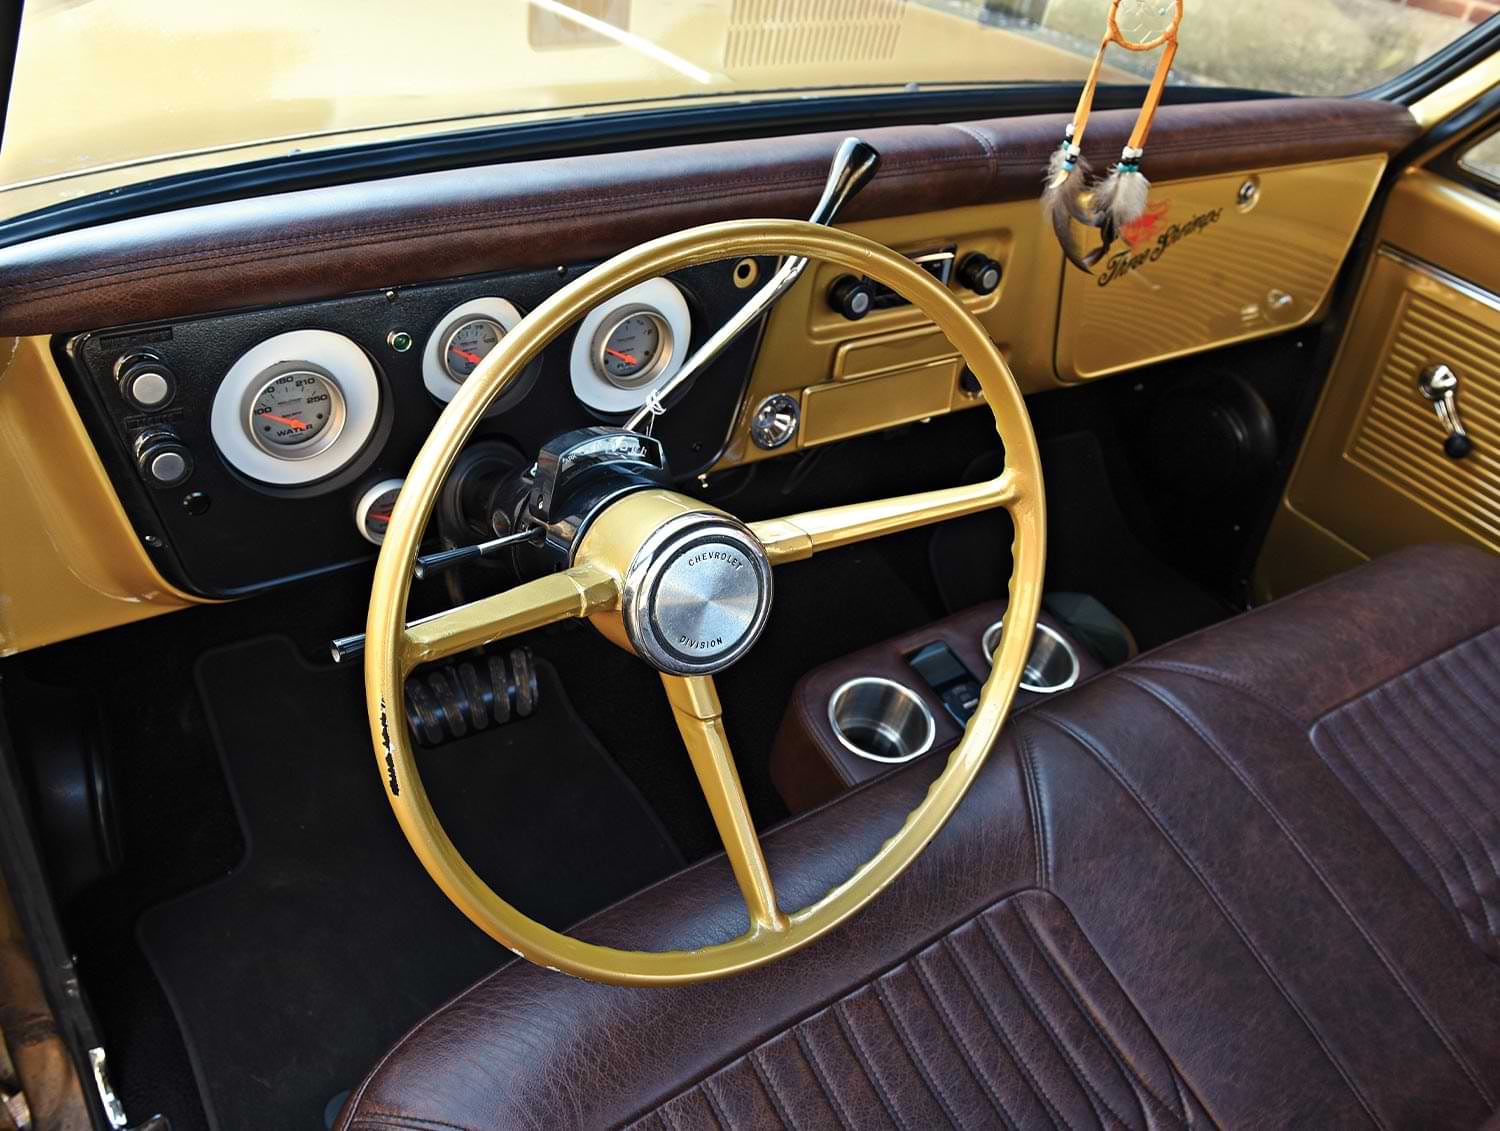 the '68 C10's gold steering wheel and dashboard